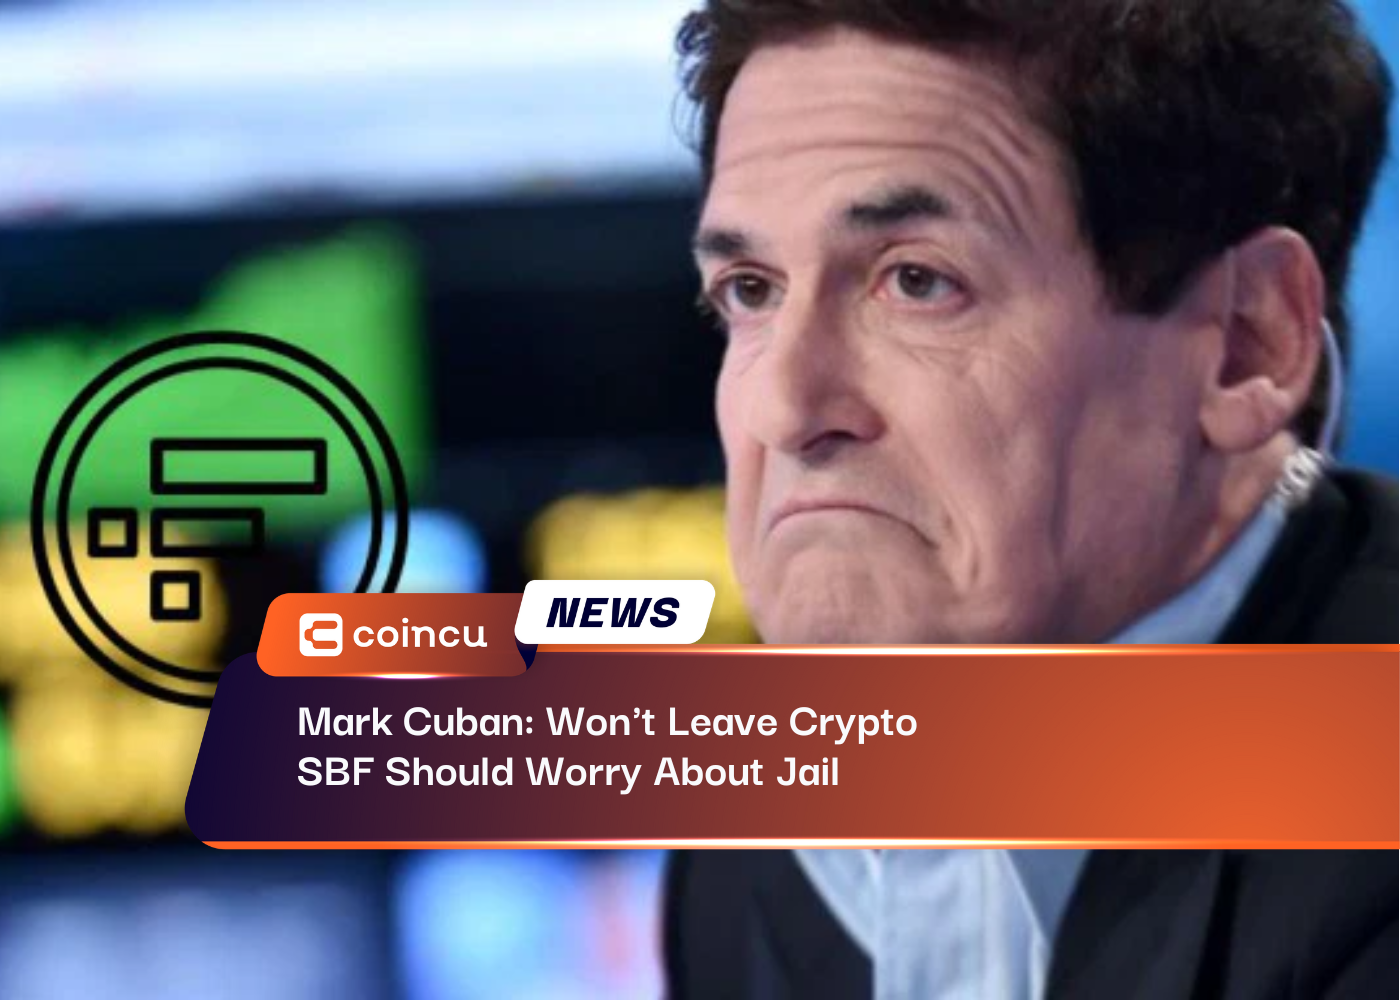 Mark Cuban: Won't Leave Crypto, SBF Should Worry About Jail